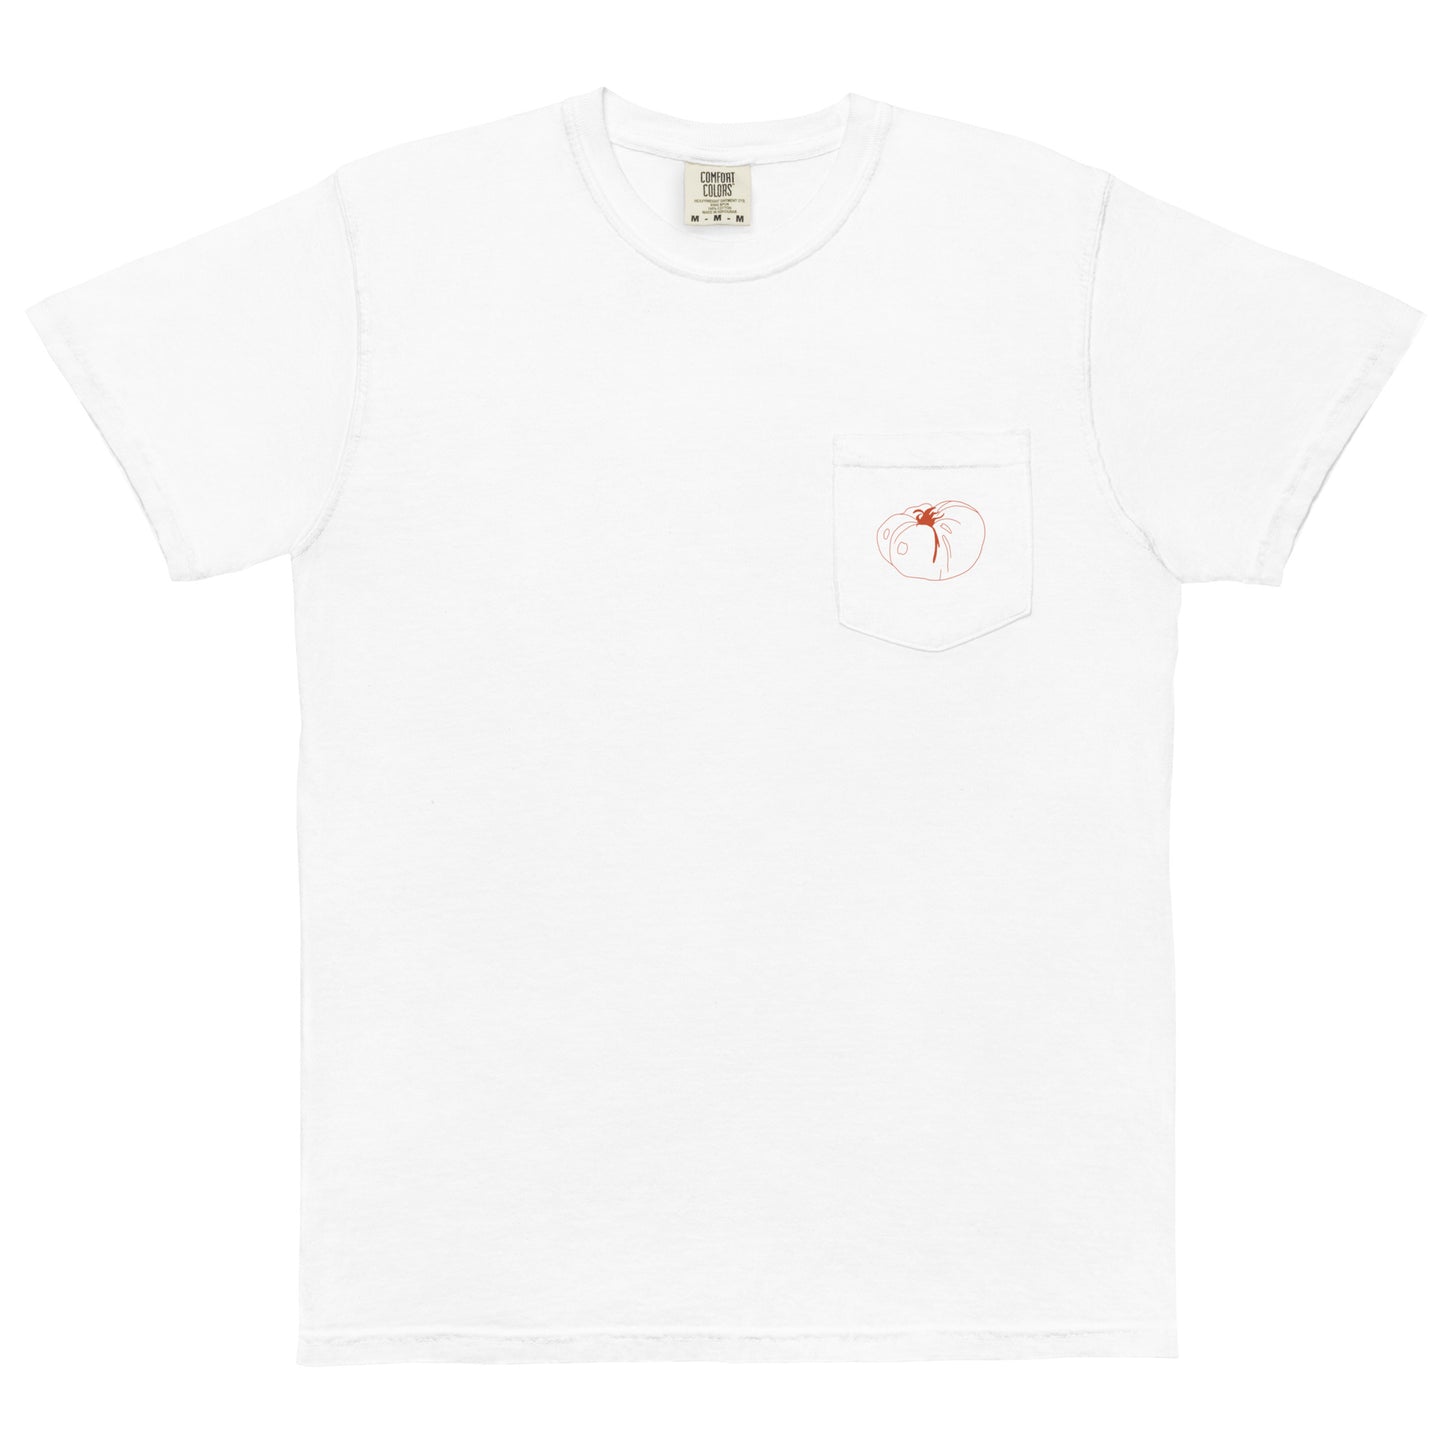 Limited Edition WYS x Produce Parties Tomato Tee